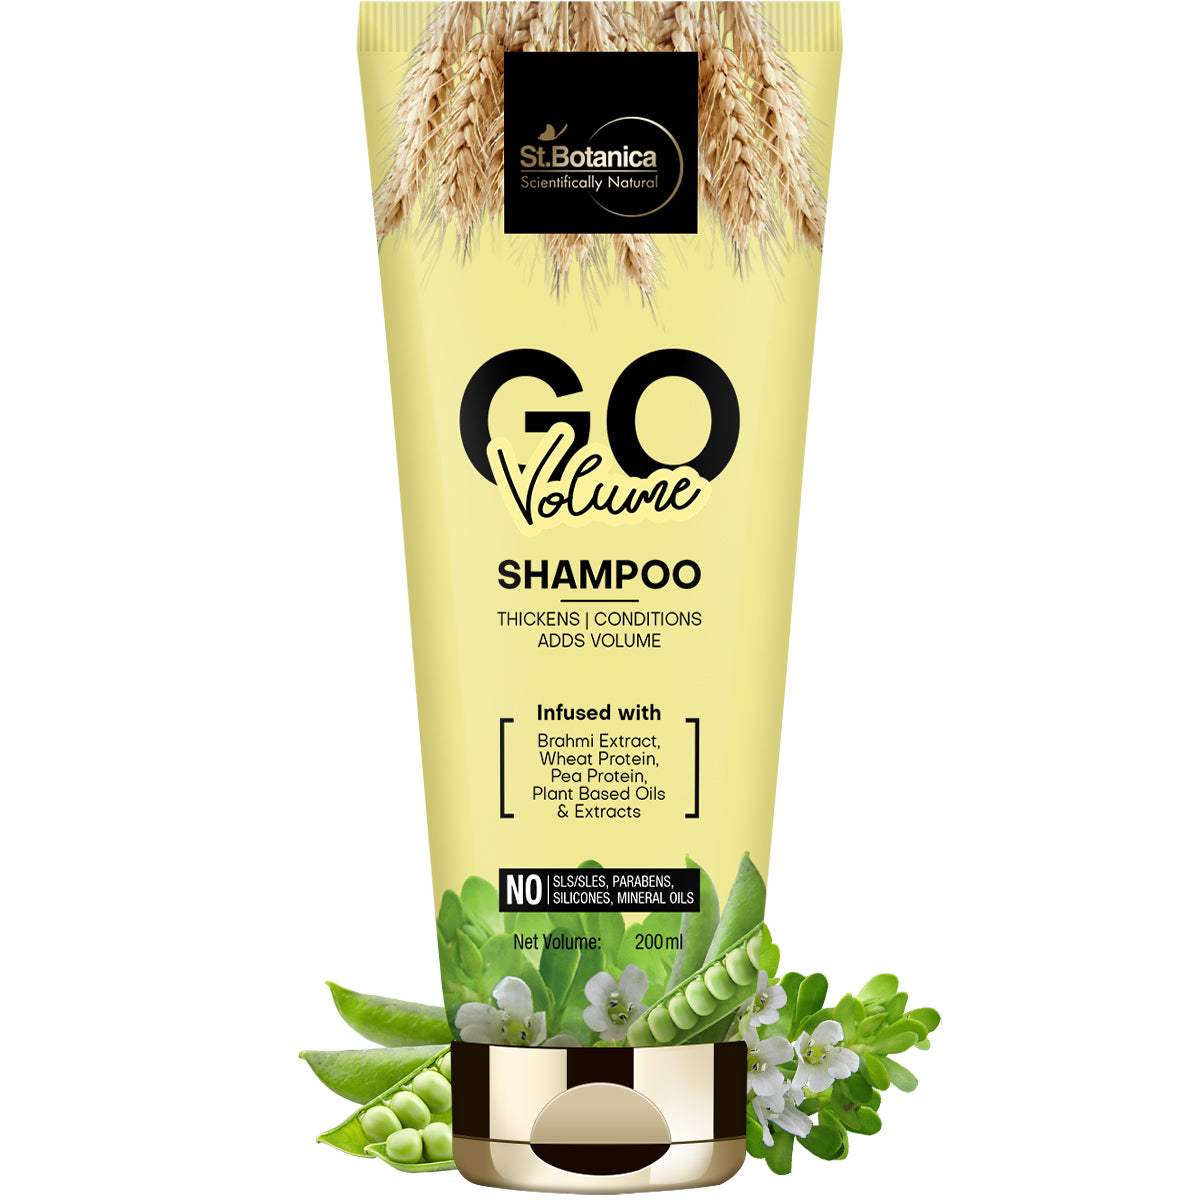 St.Botanica Go Volume Hair Shampoo - With Brahmi Extract, Wheat Protein, Pea Protein, No Sls/ Sulphate, Paraben, Silicones, Colors, 200 ml